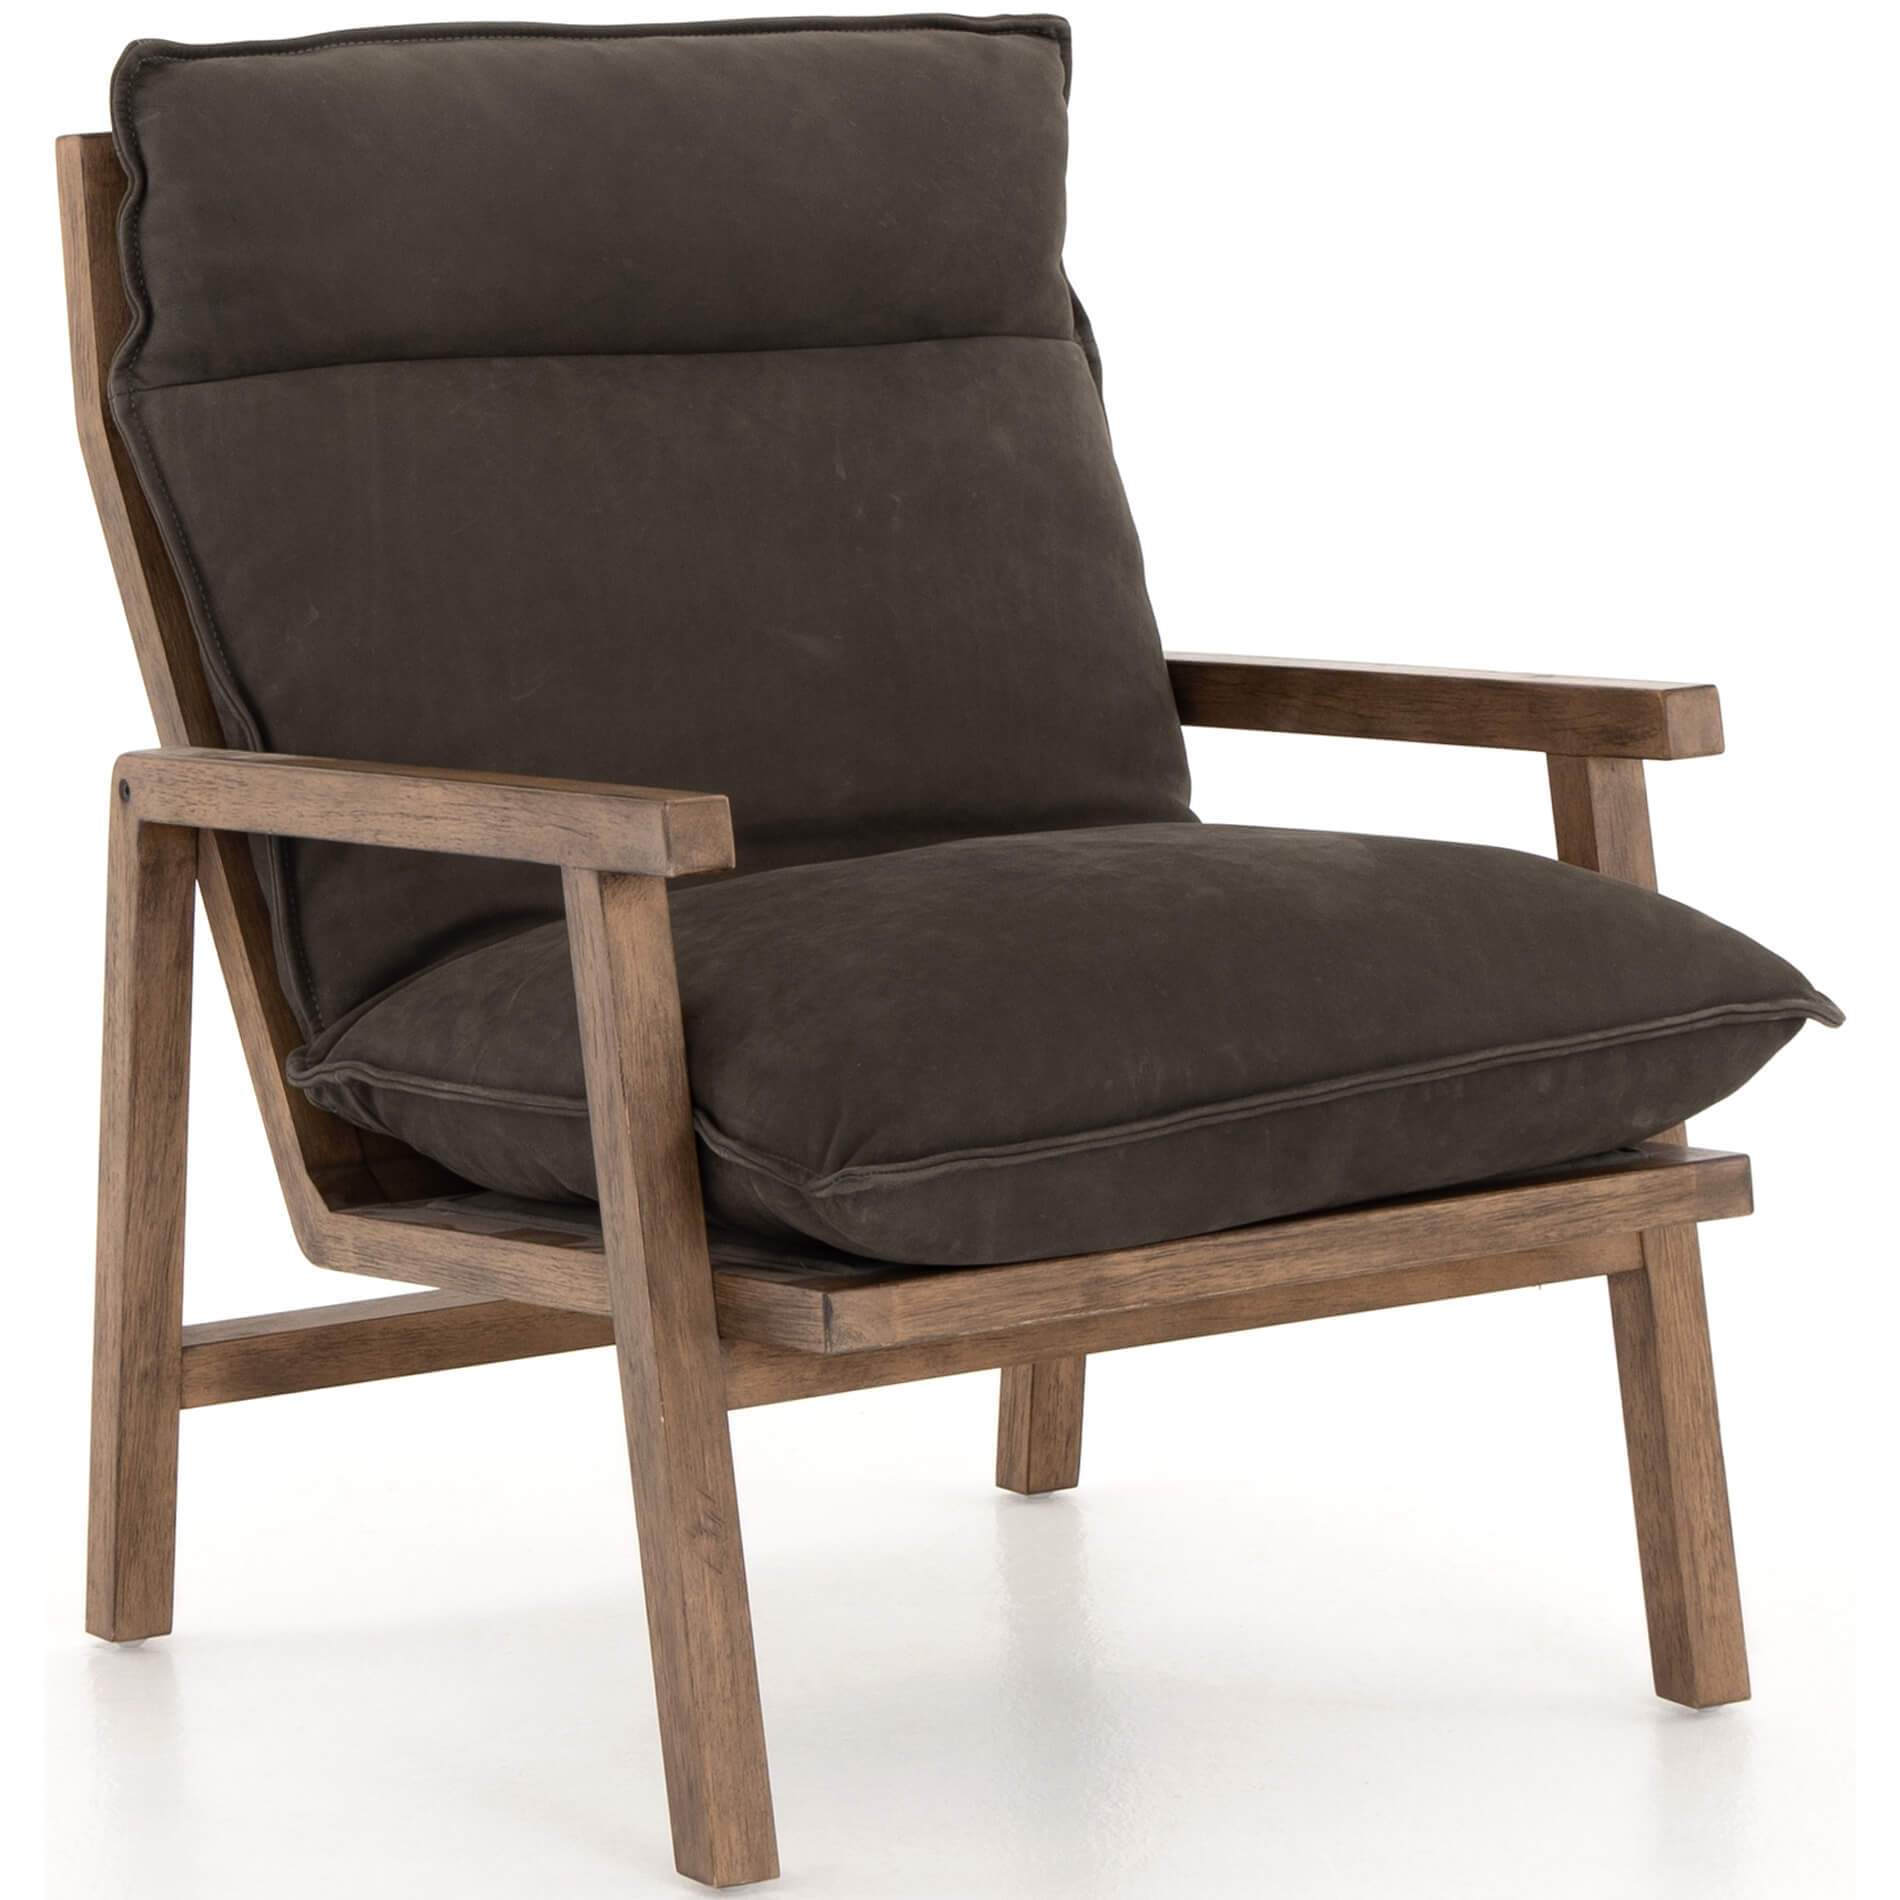 Orion Leather Chair, Nubuck Charcoal - High Fashion Home